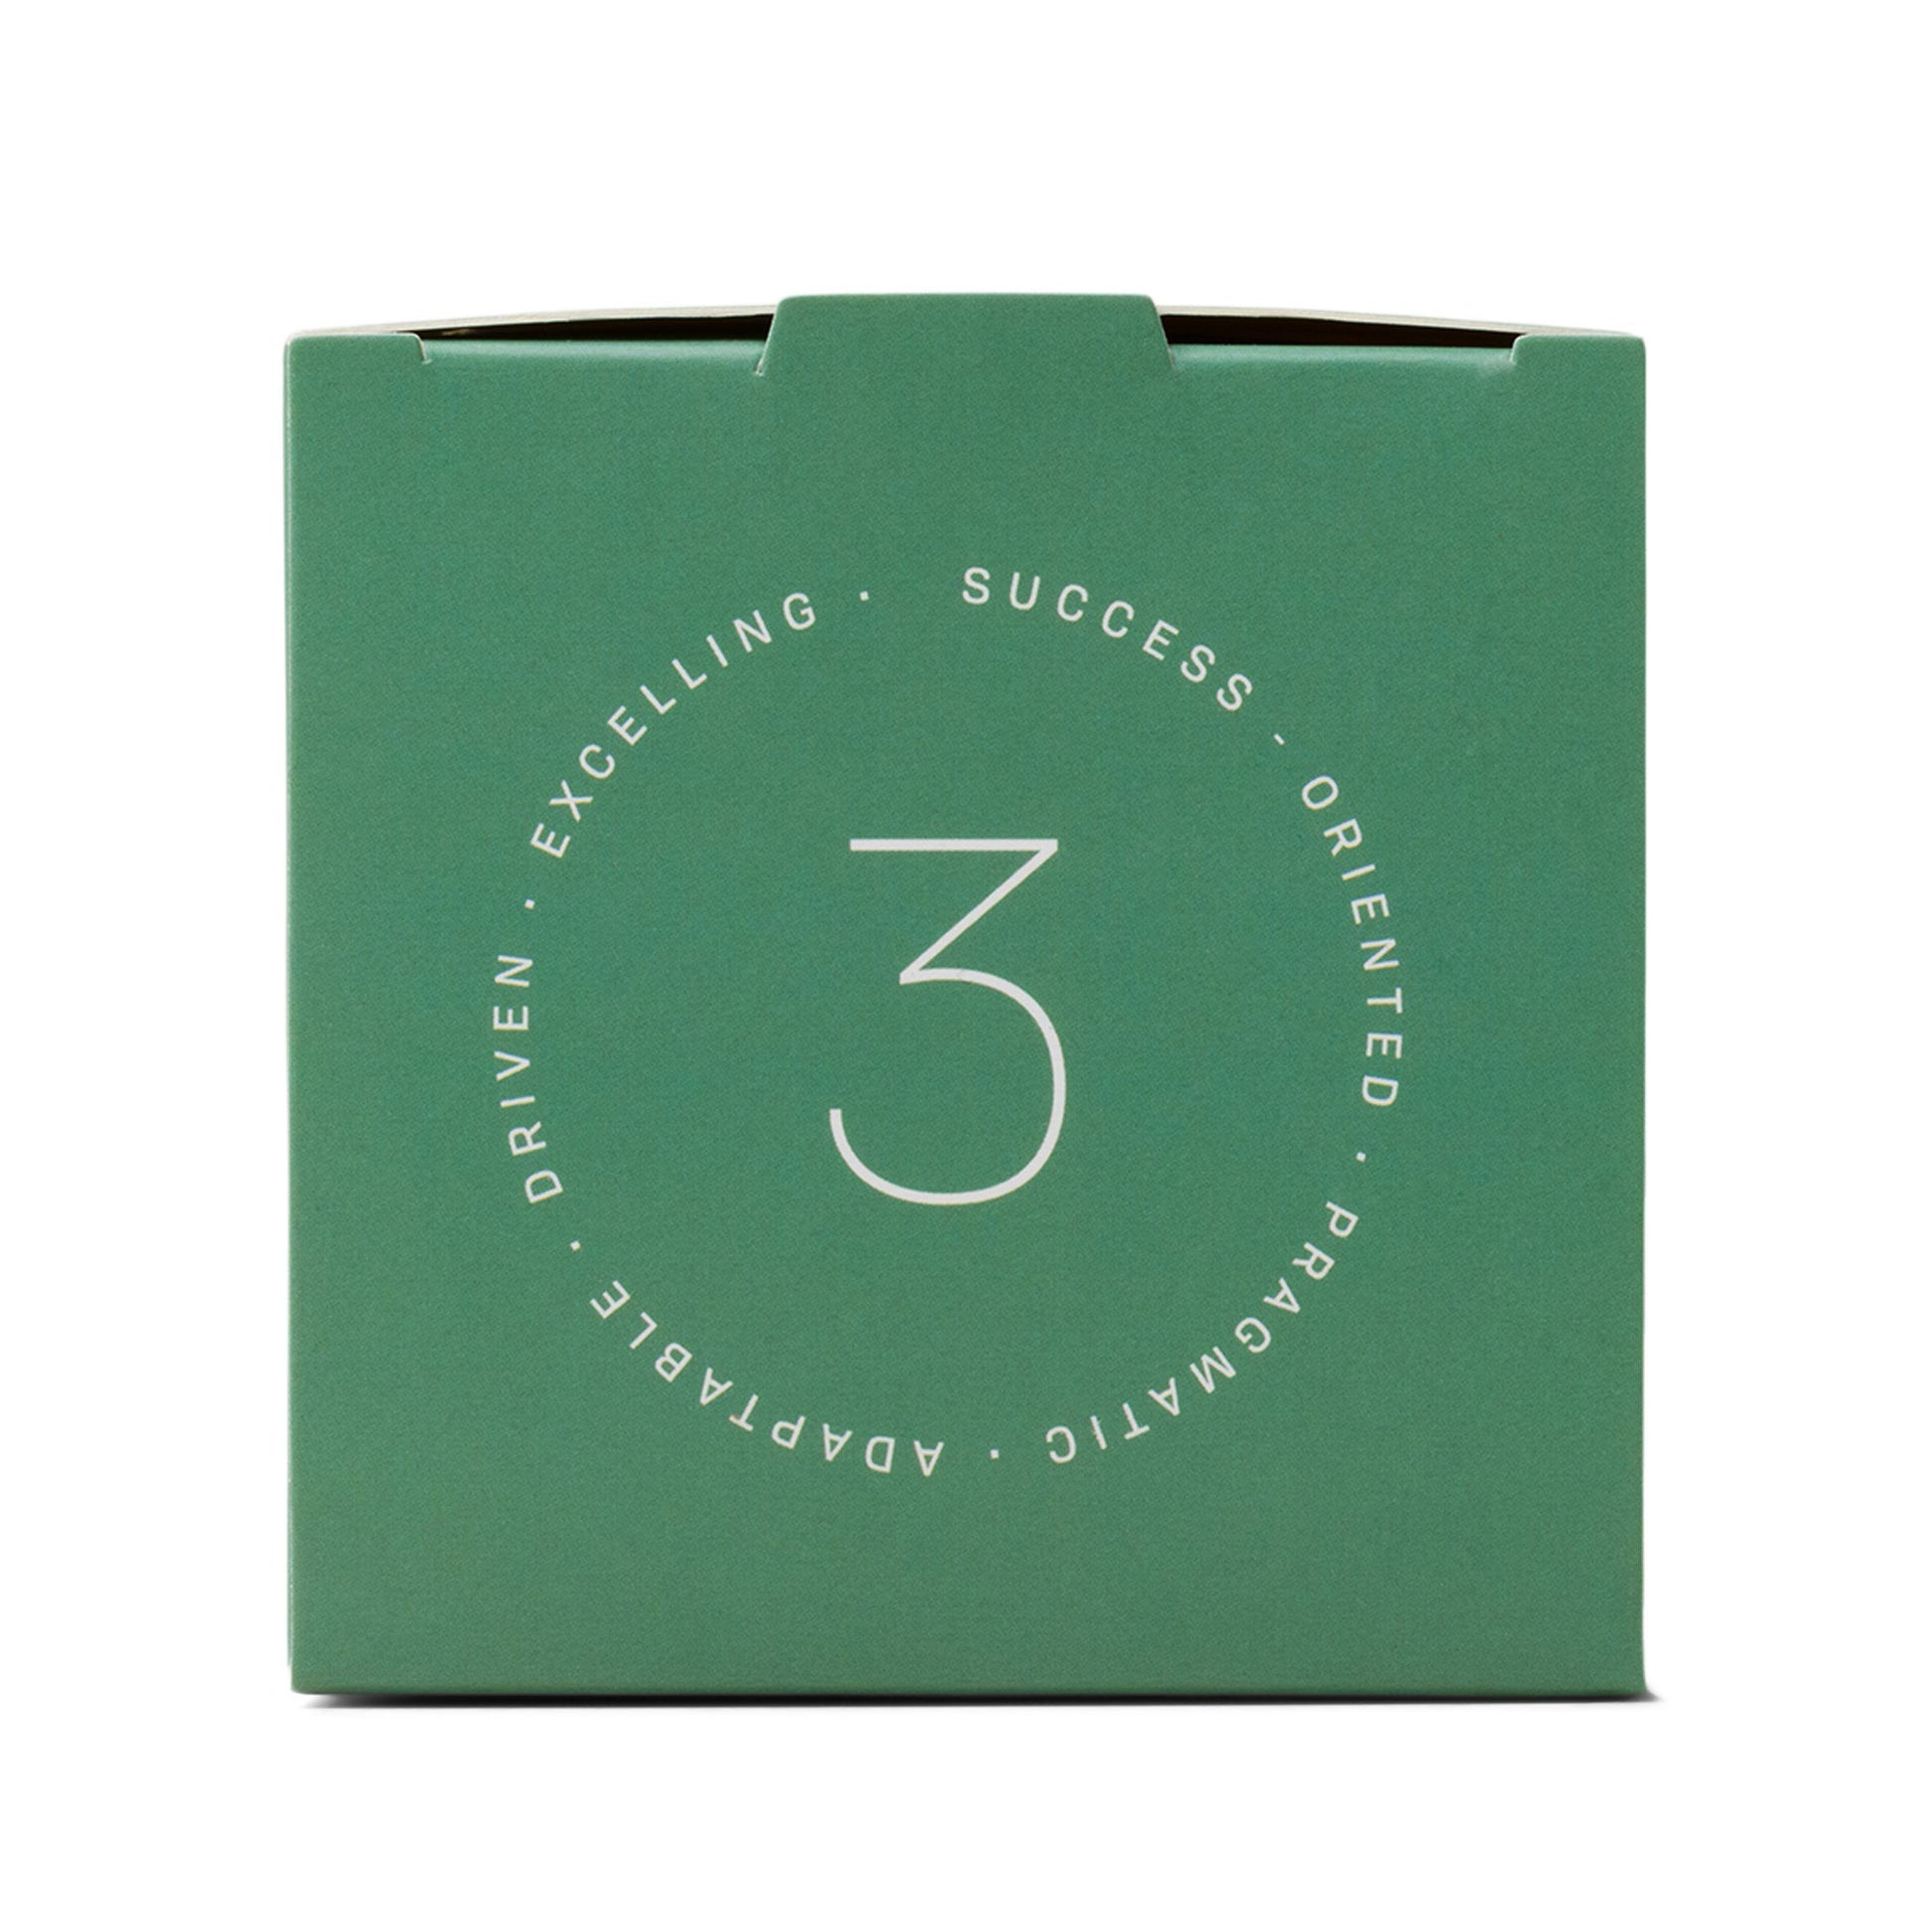 Green box which reads "the achiever"; also has the letter 3 printed on the side